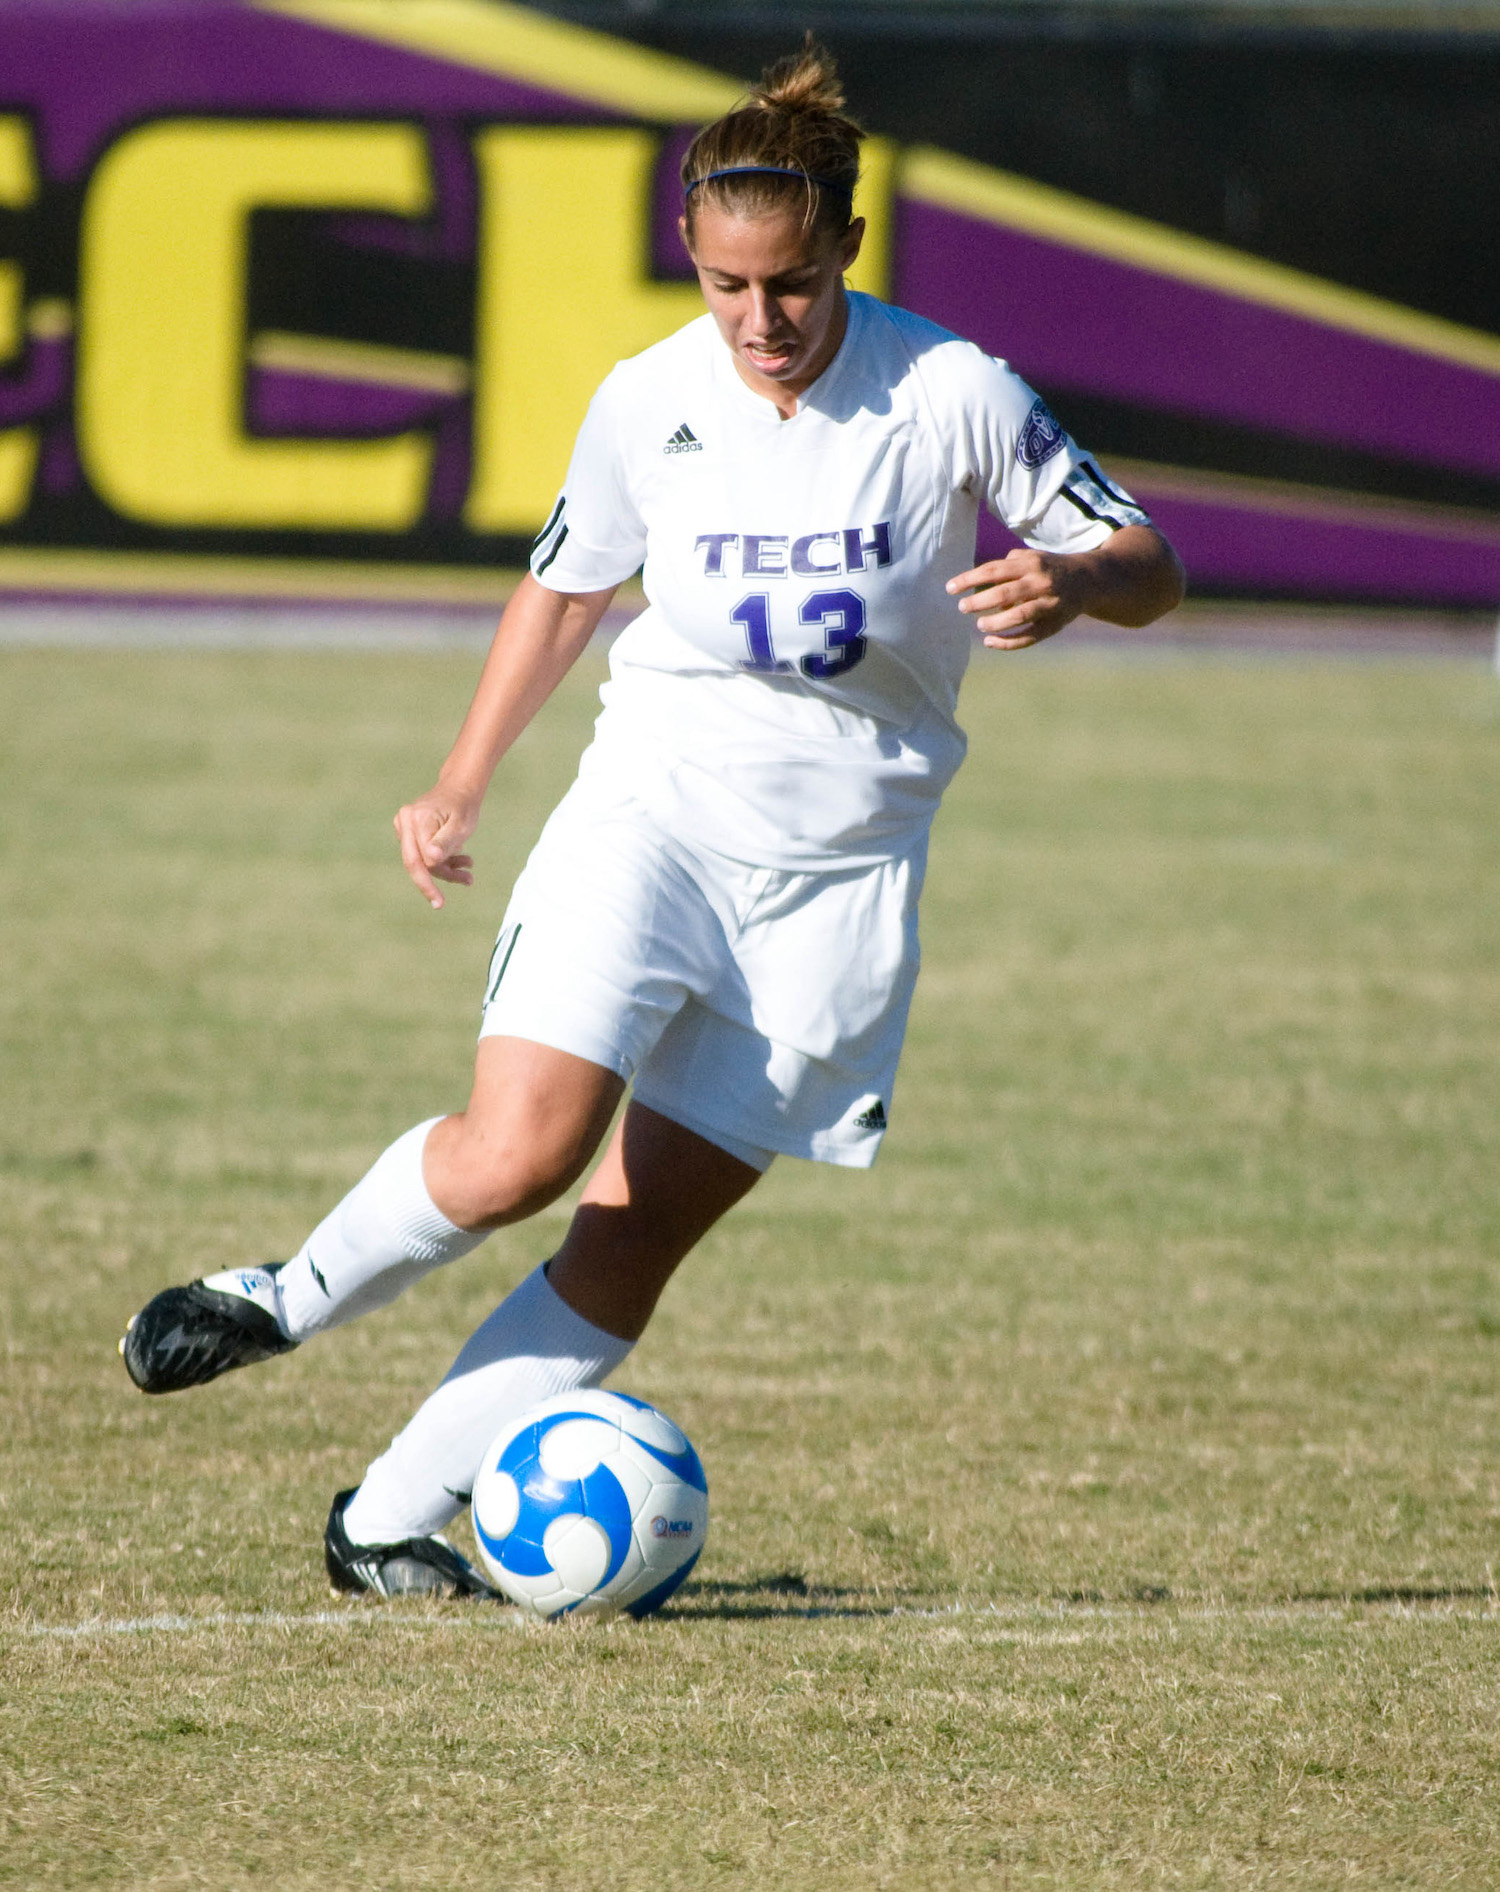 Mayo was a breakout Golden Eagle women’s soccer star playing from 2007 to 2010.